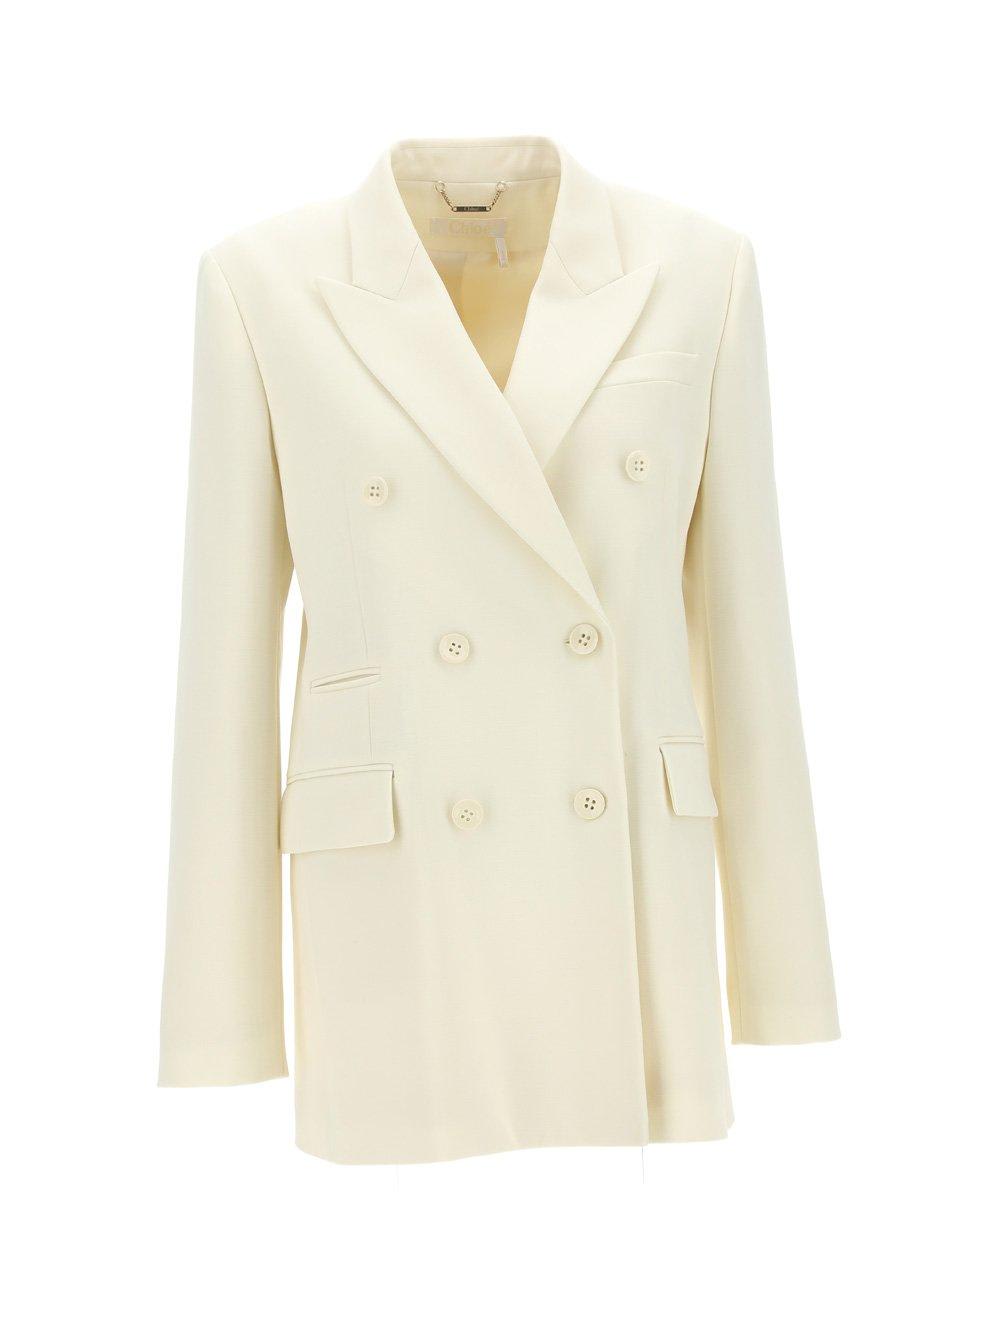 Chloé Double-breasted Jacket